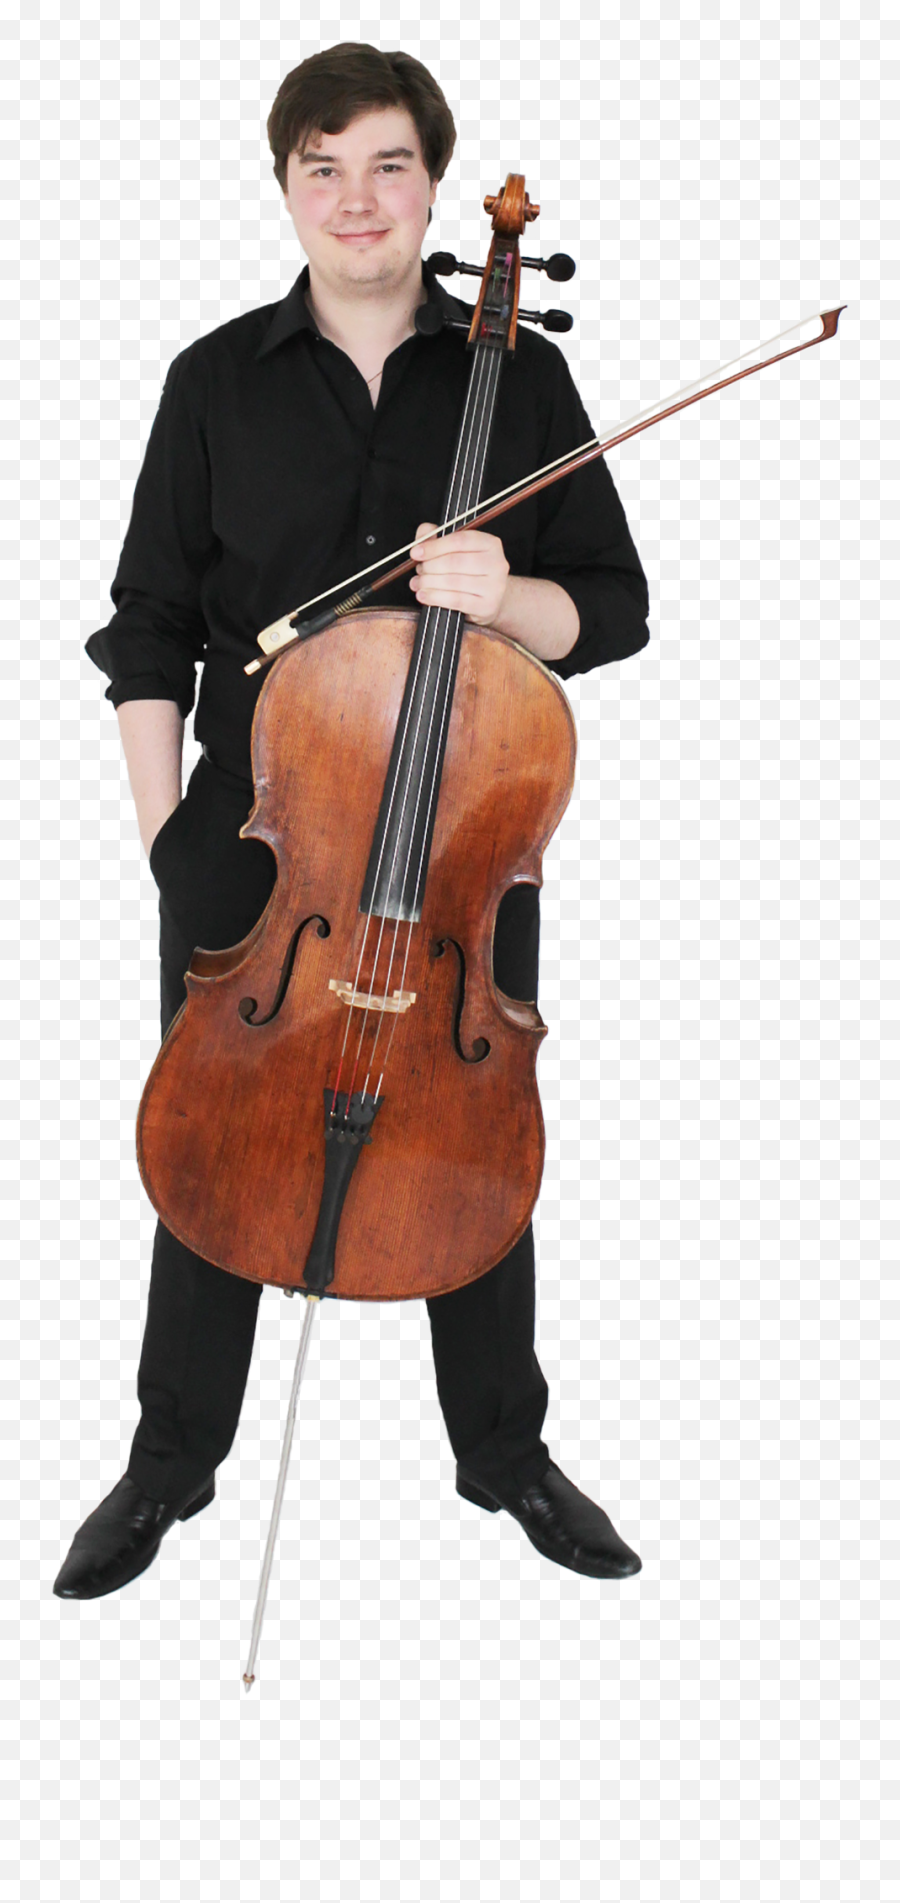 Download Cello - Full Size Png Image Pngkit Violone,Cello Png